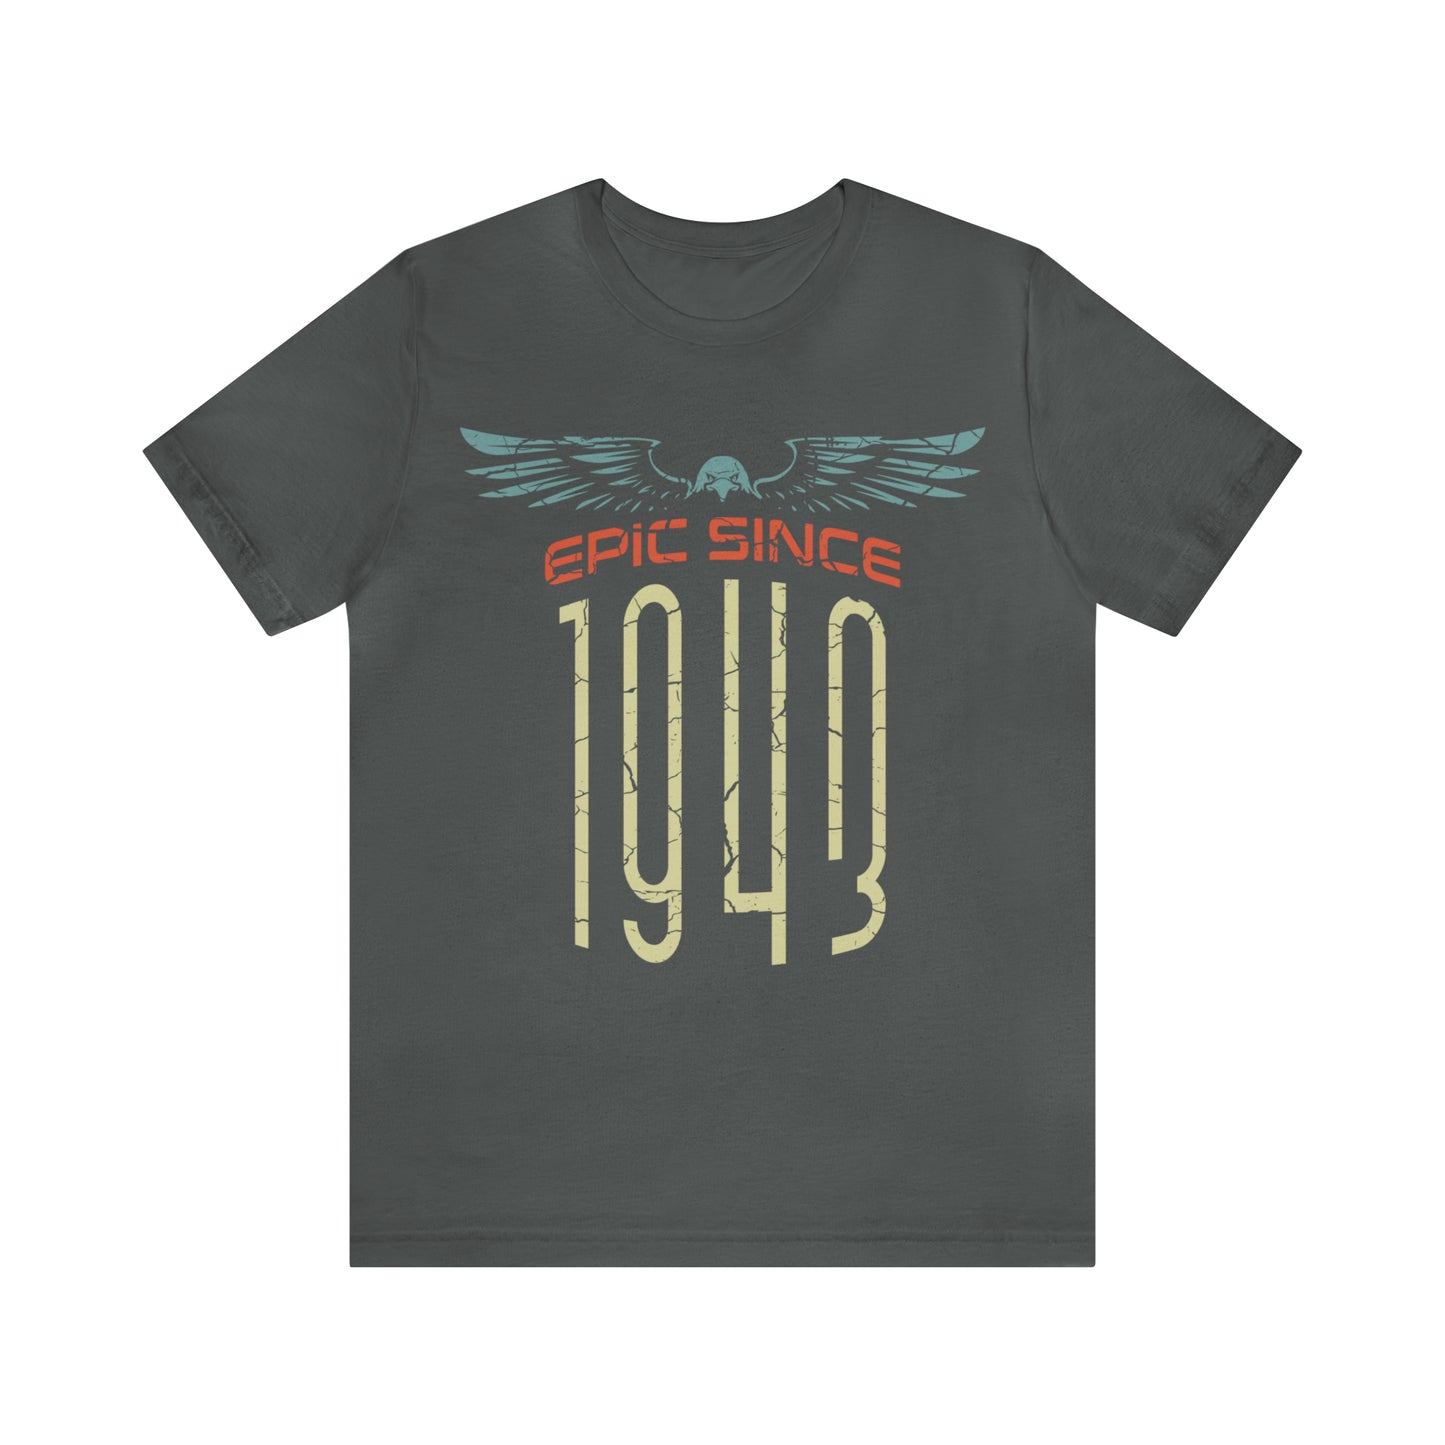 Epic Since 1943 Birthday Gift shirt for Brother or Husband, Gift Shirt For men or Father, Anniversary gifts for dad or stepfather